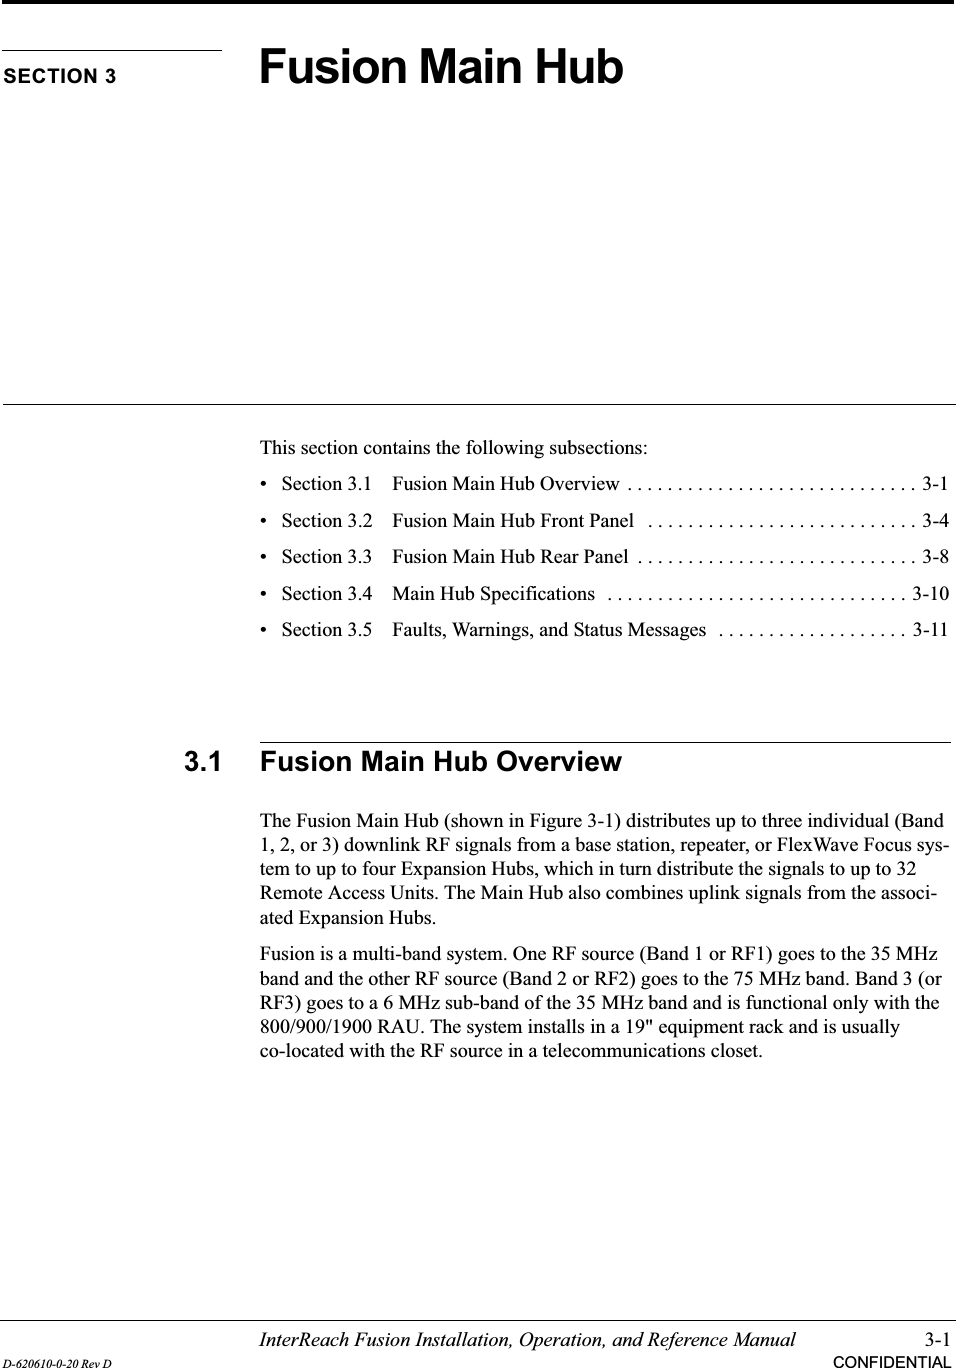 InterReach Fusion Installation, Operation, and Reference Manual 3-1D-620610-0-20 Rev D CONFIDENTIALSECTION 3 Fusion Main HubThis section contains the following subsections:• Section 3.1  Fusion Main Hub Overview . . . . . . . . . . . . . . . . . . . . . . . . . . . . . 3-1• Section 3.2   Fusion Main Hub Front Panel   . . . . . . . . . . . . . . . . . . . . . . . . . . . 3-4• Section 3.3   Fusion Main Hub Rear Panel  . . . . . . . . . . . . . . . . . . . . . . . . . . . . 3-8• Section 3.4   Main Hub Specifications   . . . . . . . . . . . . . . . . . . . . . . . . . . . . . . 3-10• Section 3.5   Faults, Warnings, and Status Messages  . . . . . . . . . . . . . . . . . . .  3-113.1 Fusion Main Hub OverviewThe Fusion Main Hub (shown in Figure 3-1) distributes up to three individual (Band 1, 2, or 3) downlink RF signals from a base station, repeater, or FlexWave Focus sys-tem to up to four Expansion Hubs, which in turn distribute the signals to up to 32 Remote Access Units. The Main Hub also combines uplink signals from the associ-ated Expansion Hubs.Fusion is a multi-band system. One RF source (Band 1 or RF1) goes to the 35 MHz band and the other RF source (Band 2 or RF2) goes to the 75 MHz band. Band 3 (or RF3) goes to a 6 MHz sub-band of the 35 MHz band and is functional only with the 800/900/1900 RAU. The system installs in a 19&quot; equipment rack and is usually co-located with the RF source in a telecommunications closet.